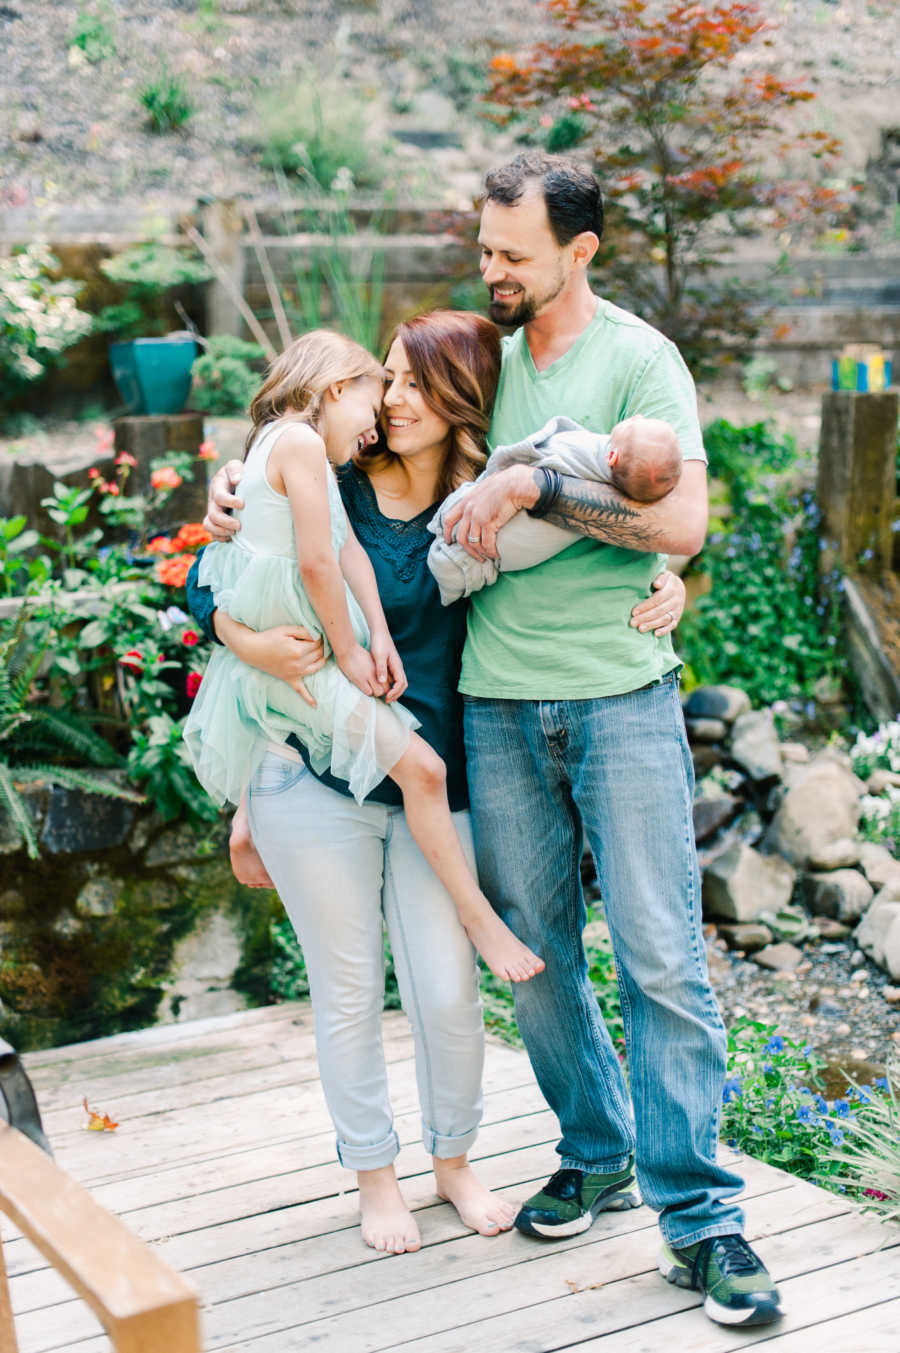 Family of four take spring photos together in a garden